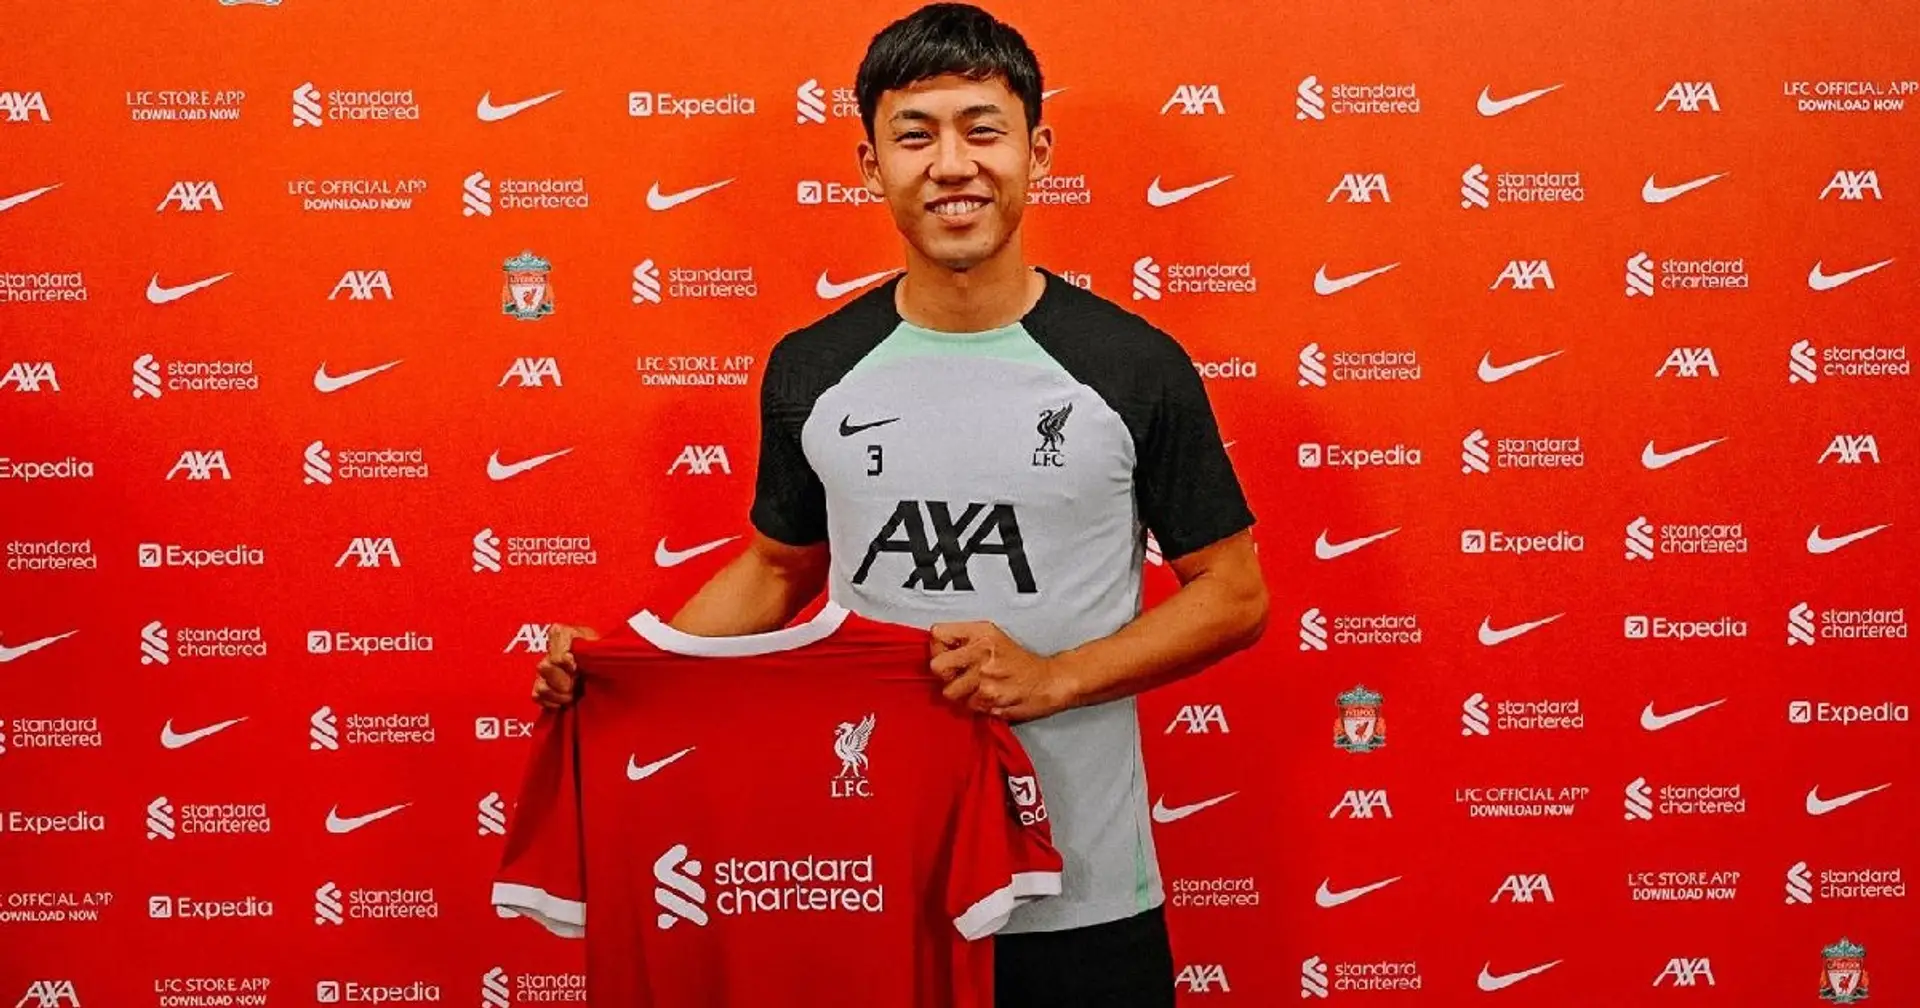 Endo's Liverpool shirt number revealed